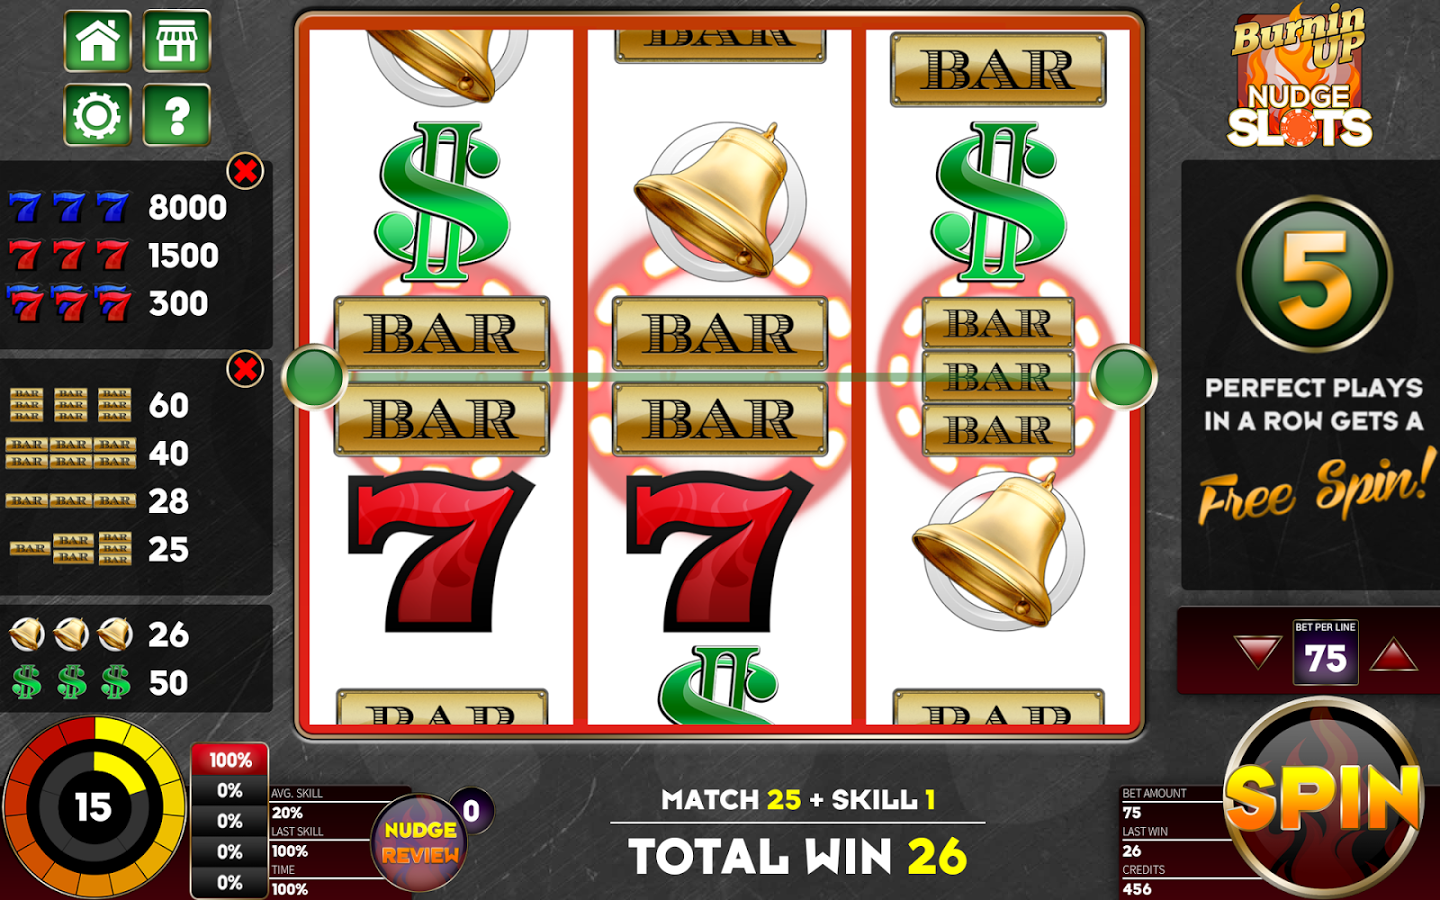 Top rated slot machine apps